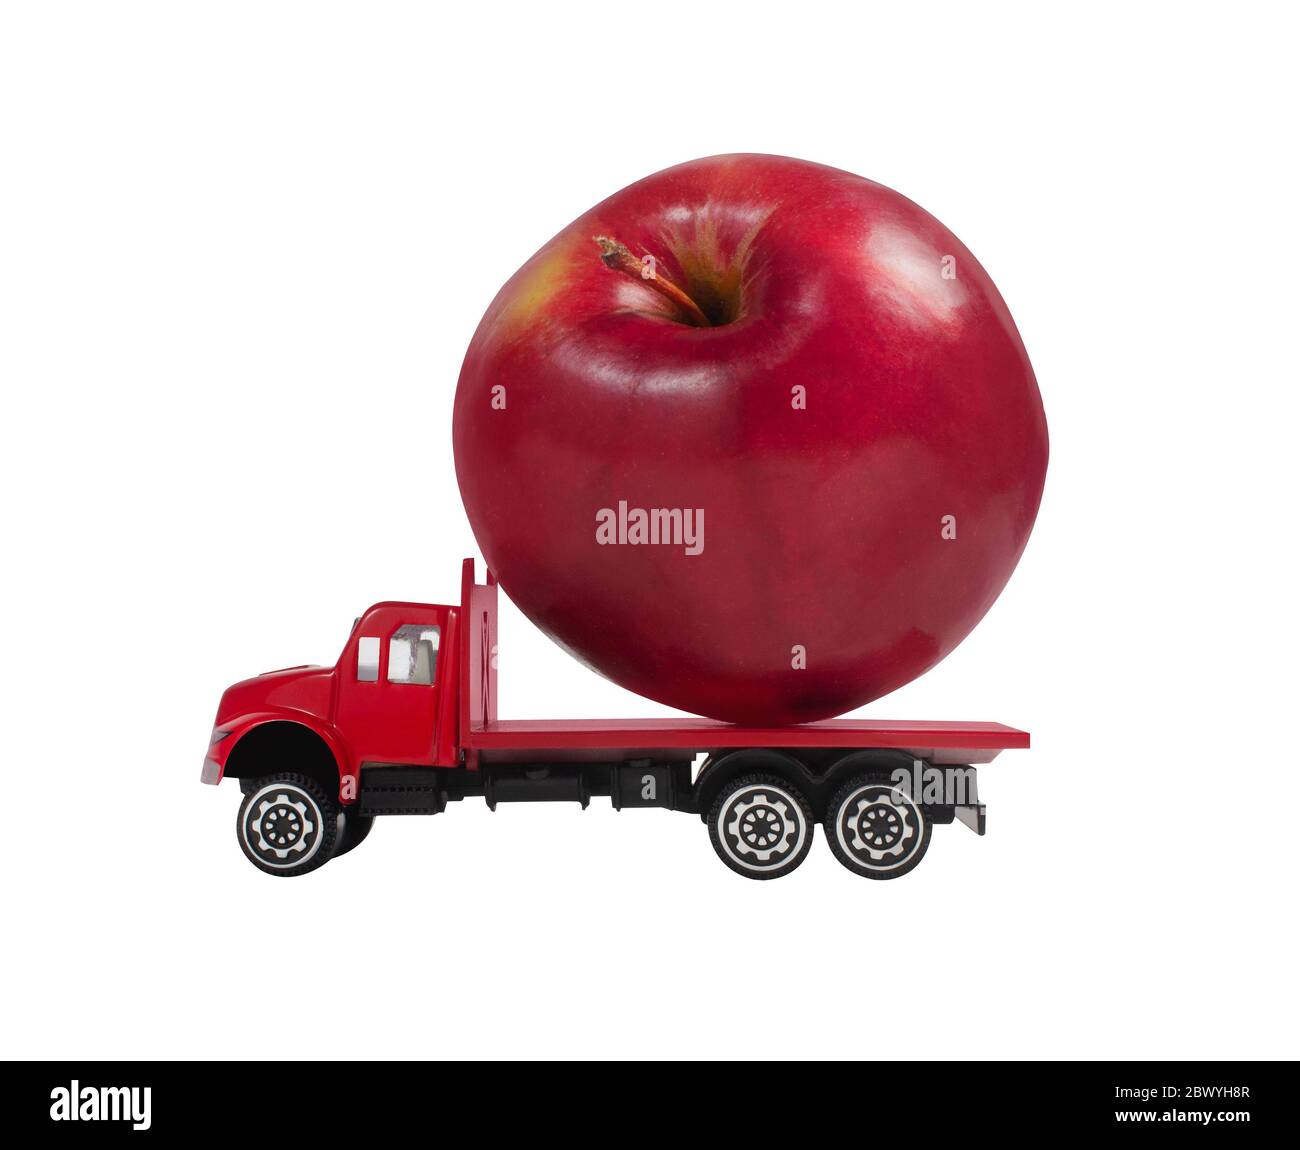 Isolated photo of a toy truck with apple cargo on white background profile view. Stock Photo